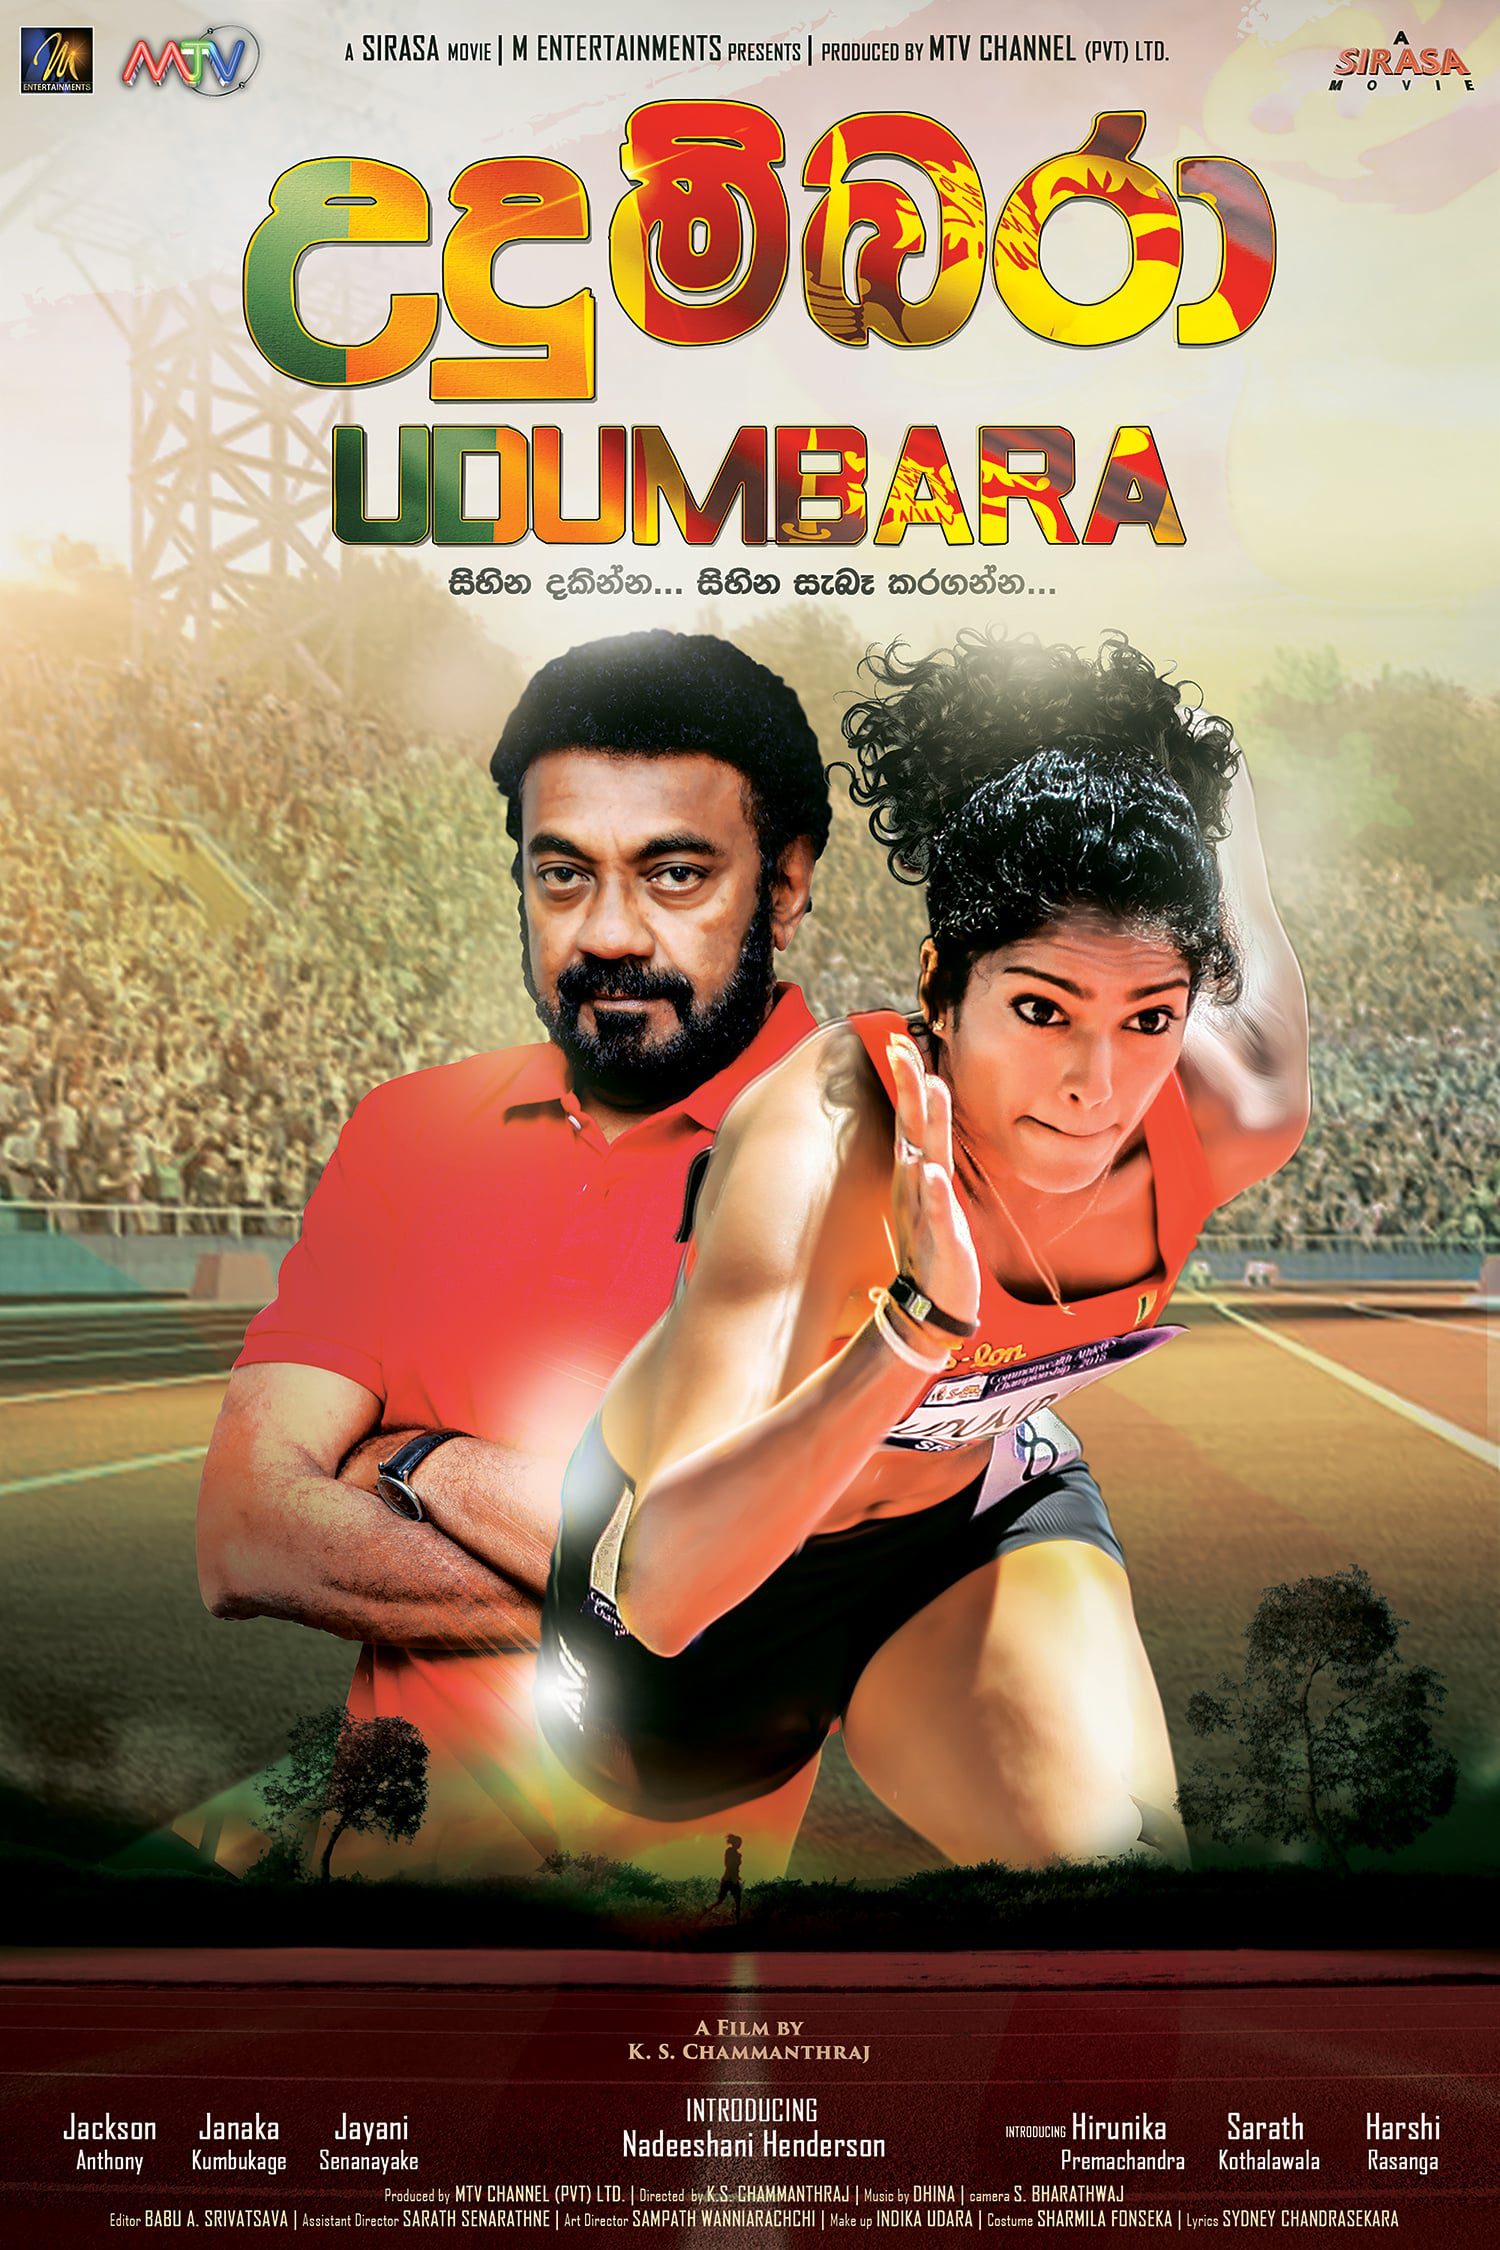 Poster for the movie "Udumbara"